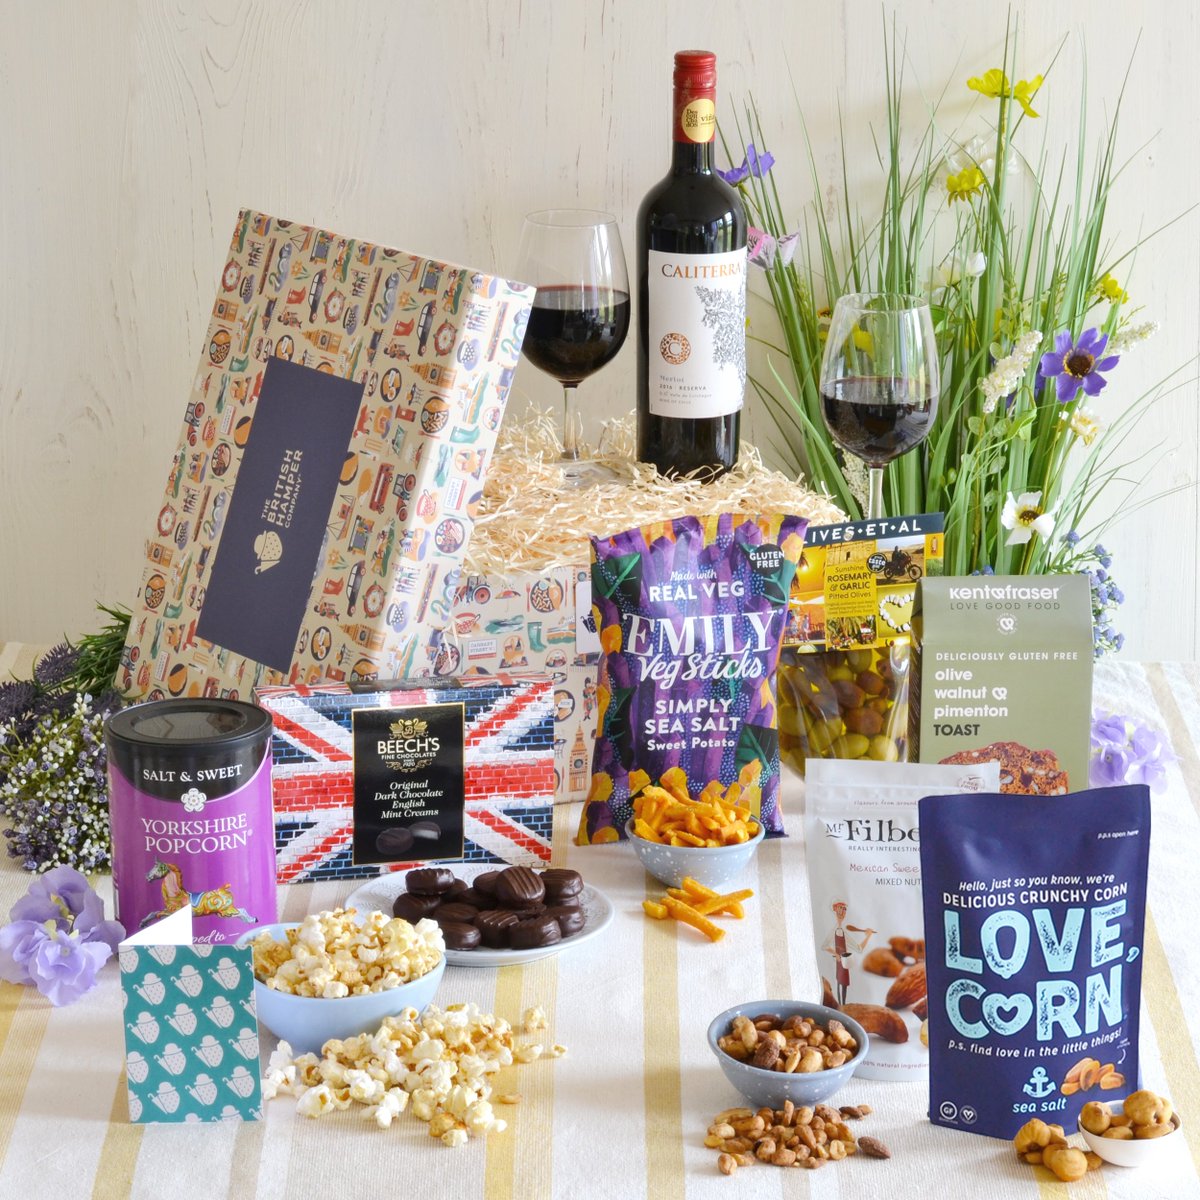 Know someone taking part in Veganuary? 🌱 Treat them to a selection of vegan delicacies with one of our hampers - perfect for sampling a variety of gourmet plant-based delights. Browse the range here - britishhamper.com/uk/audience/sp… #Veganuary #Vegan #PlantBased #UKHampers